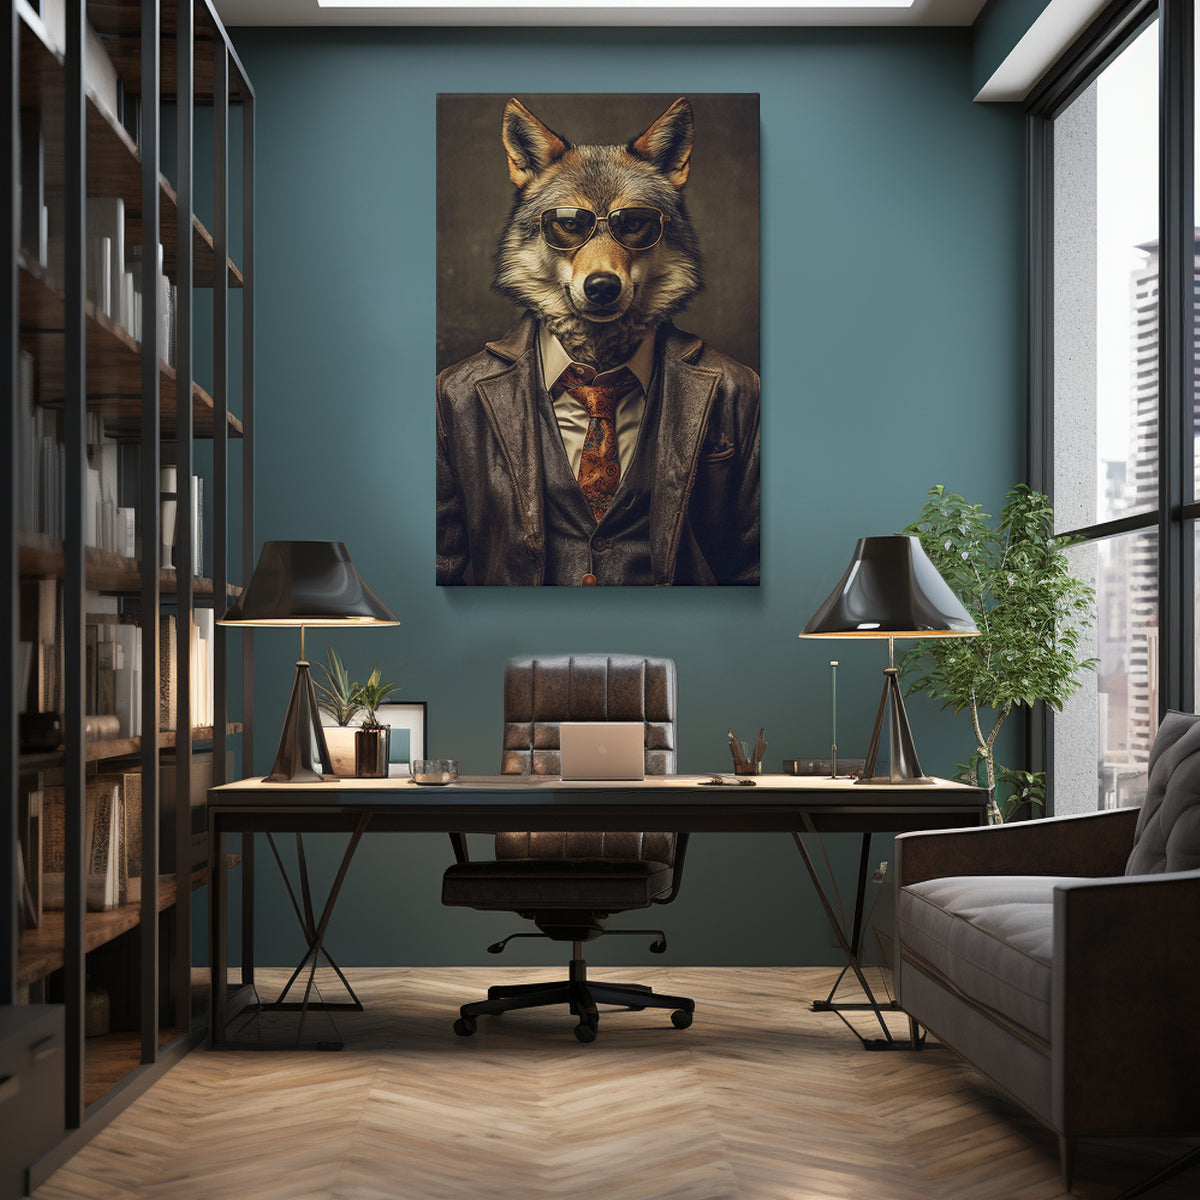 Sophisticated Wolf in Suit Canvas Print ArtLexy 1 Panel 16"x24" inches 